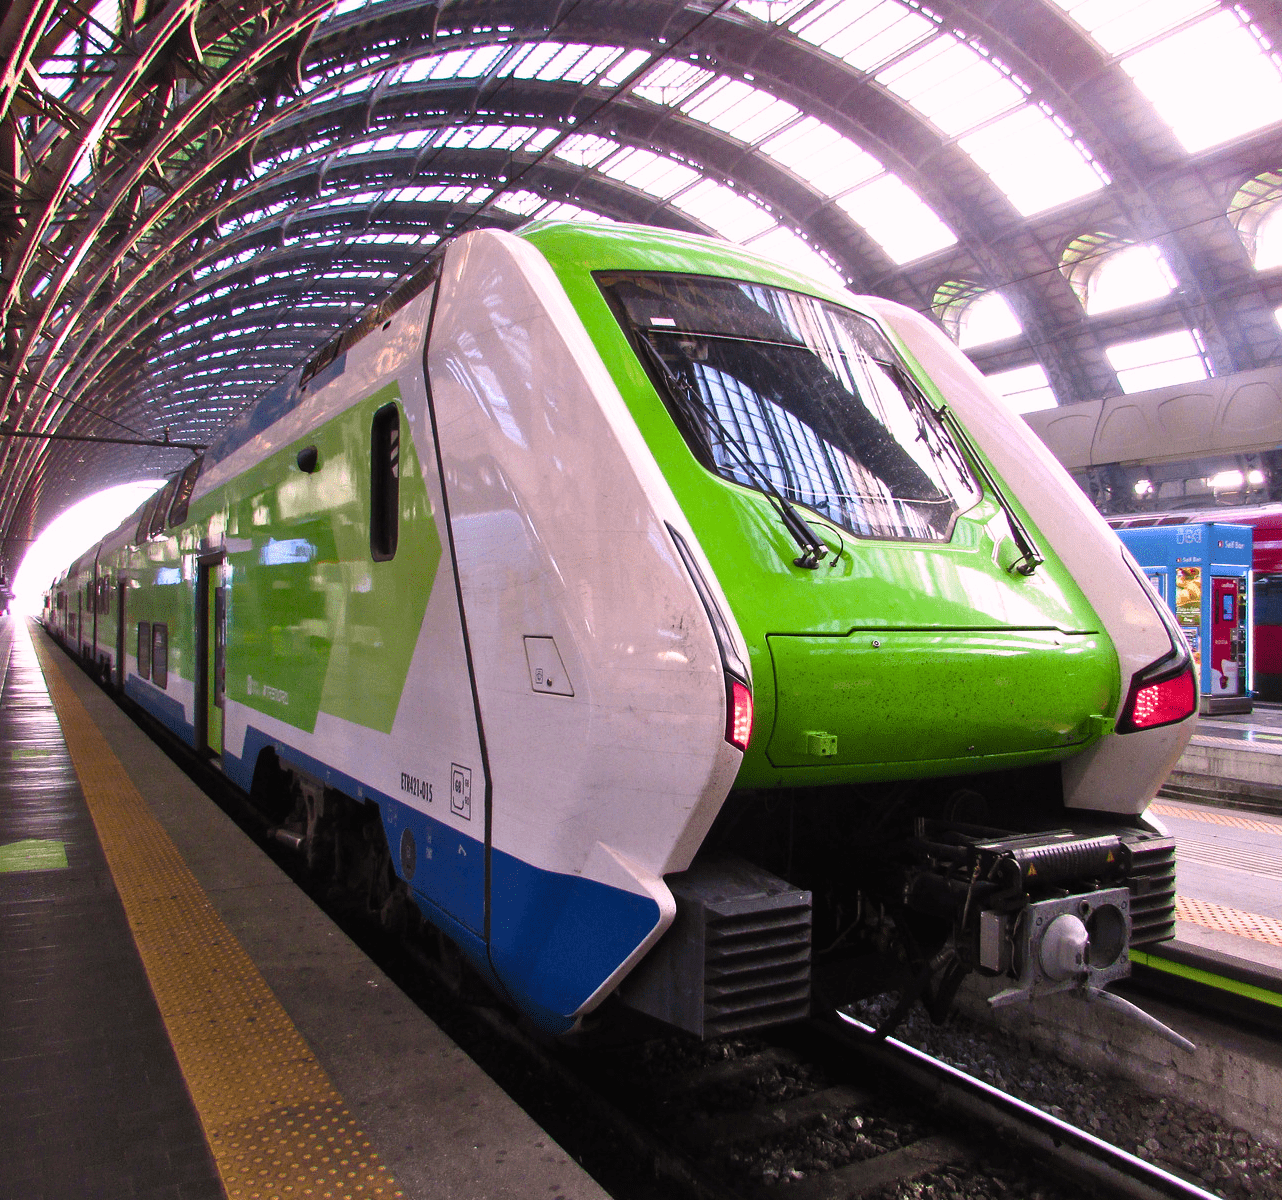 white green train in station